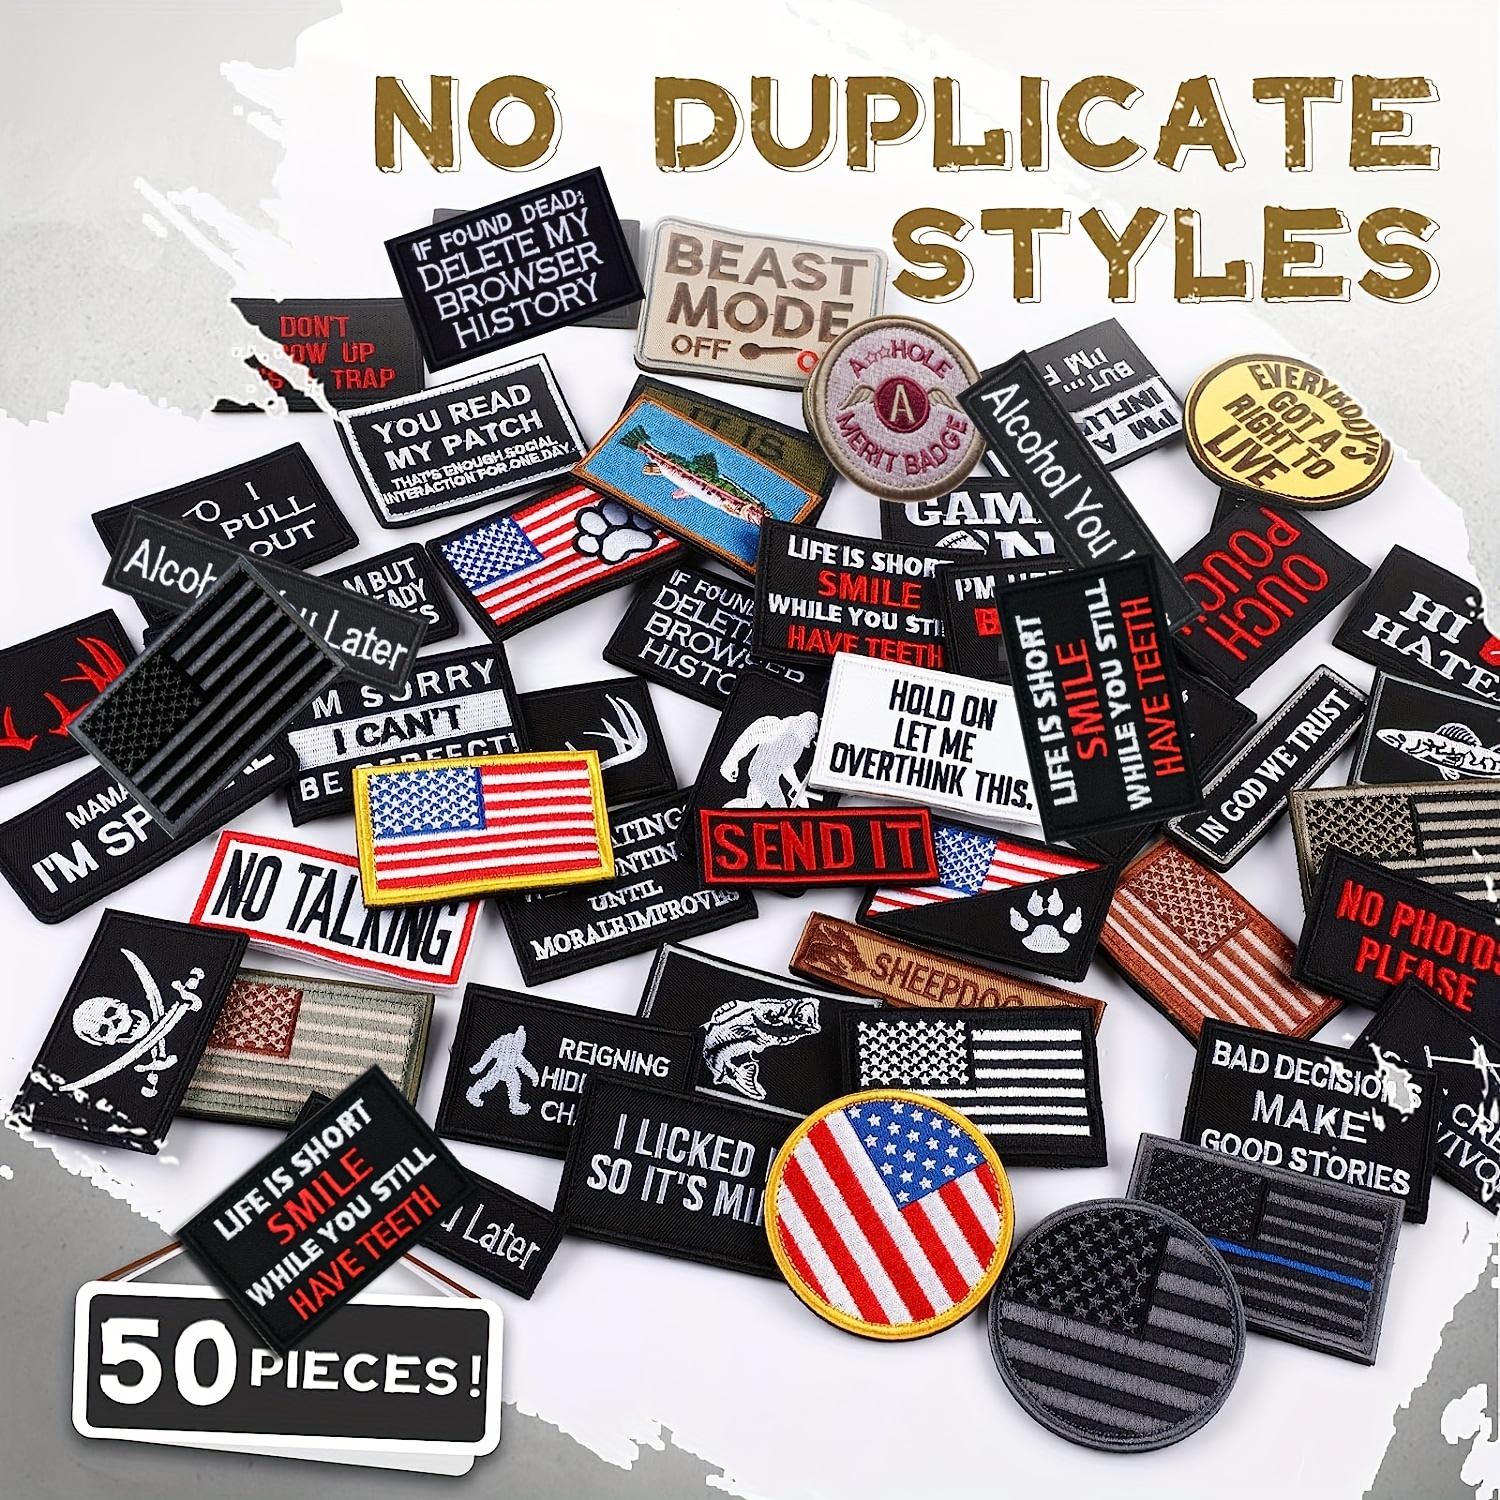  Bundle 24 Pieces Random Funny Tactical Military Patch American  Flag Patches Badges, Full Embroidery Patches Set for  Caps,Bags,Backpacks,Vest Tactical Gears (24PCS Loop and Hook Patches) :  Arts, Crafts & Sewing